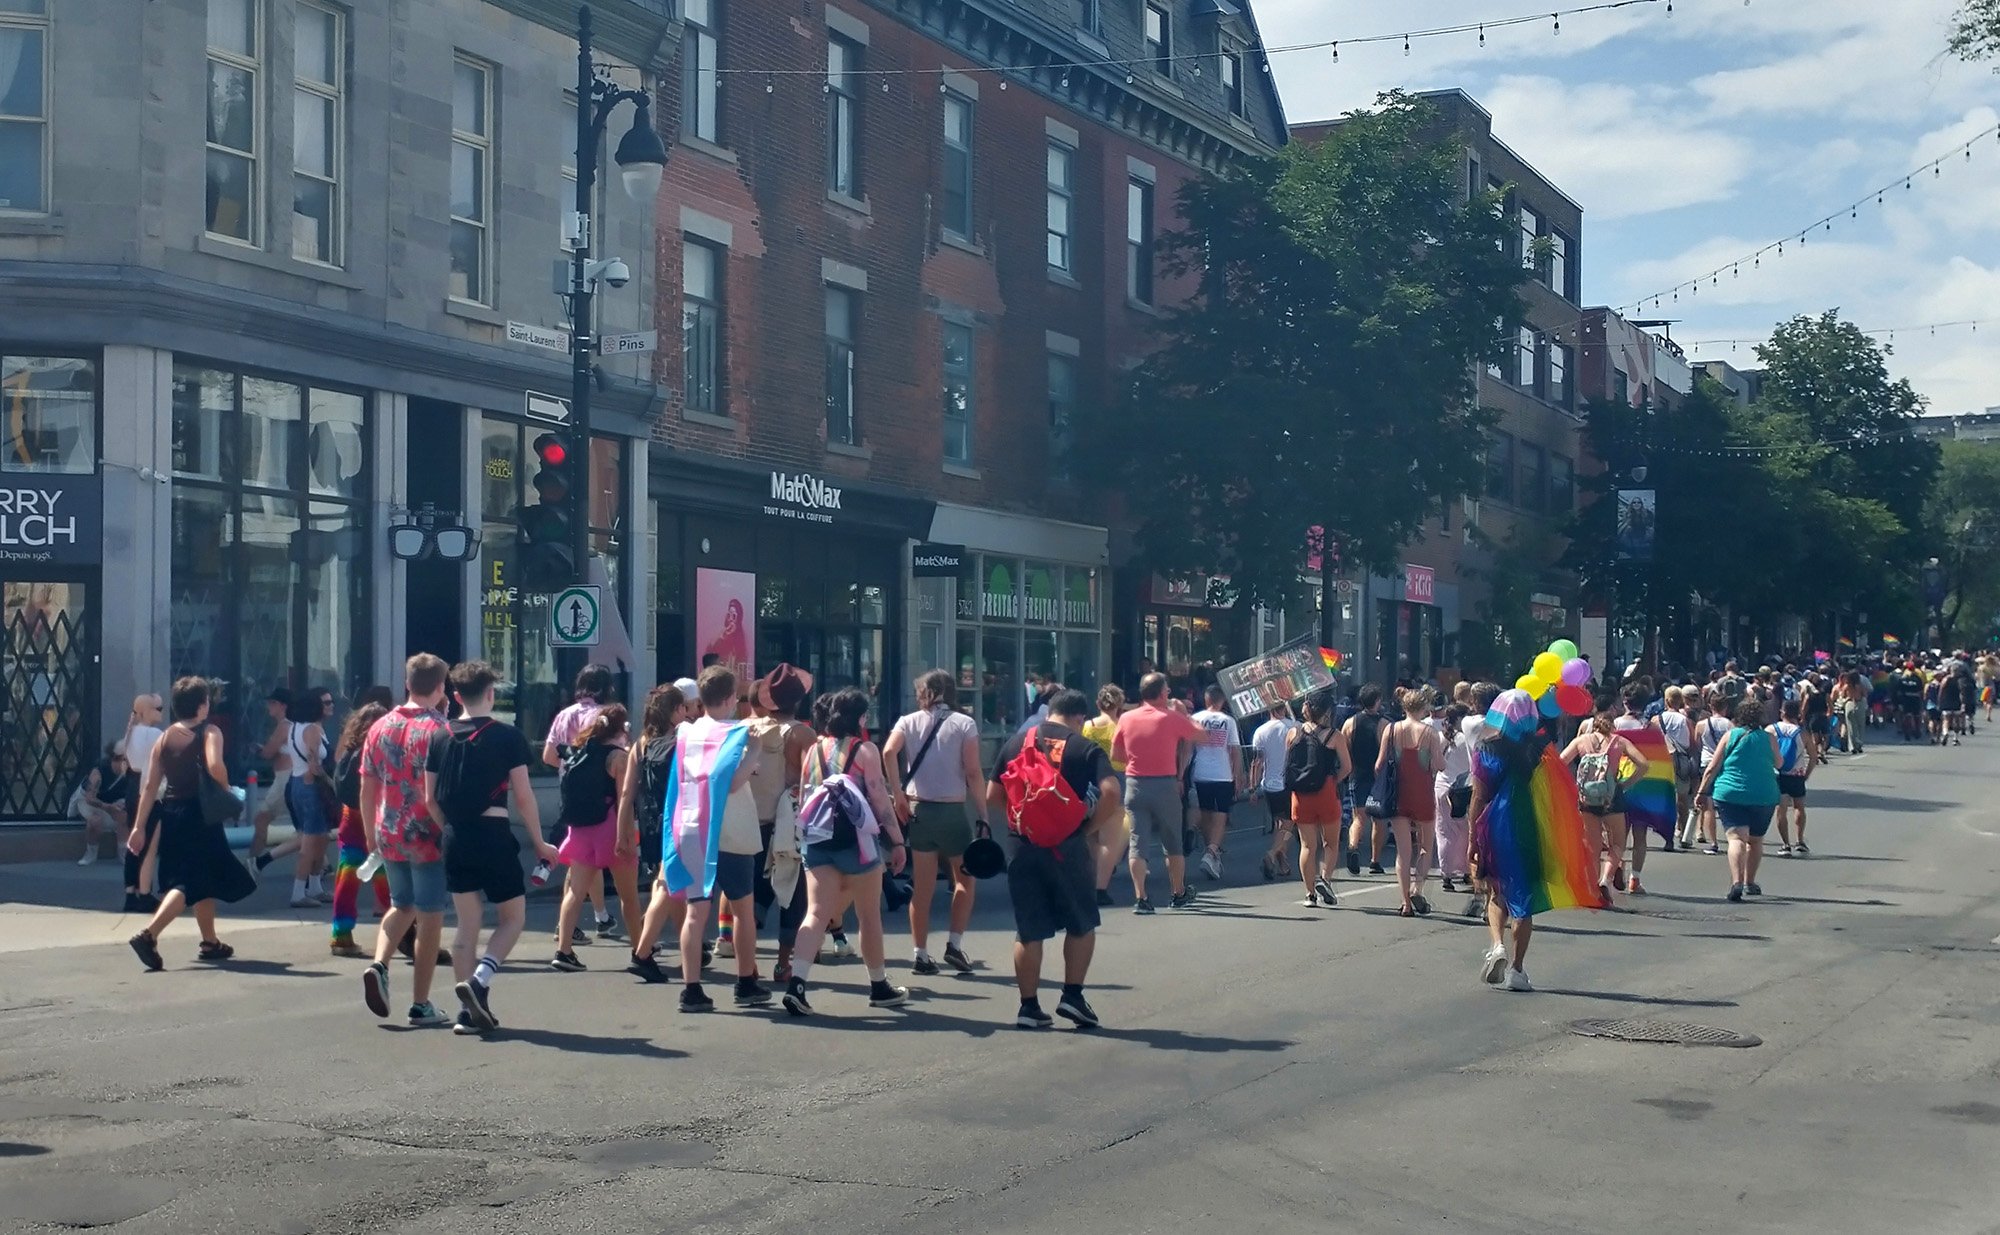 There was some kind of pride parade going on while I was waiting for my sandwich.